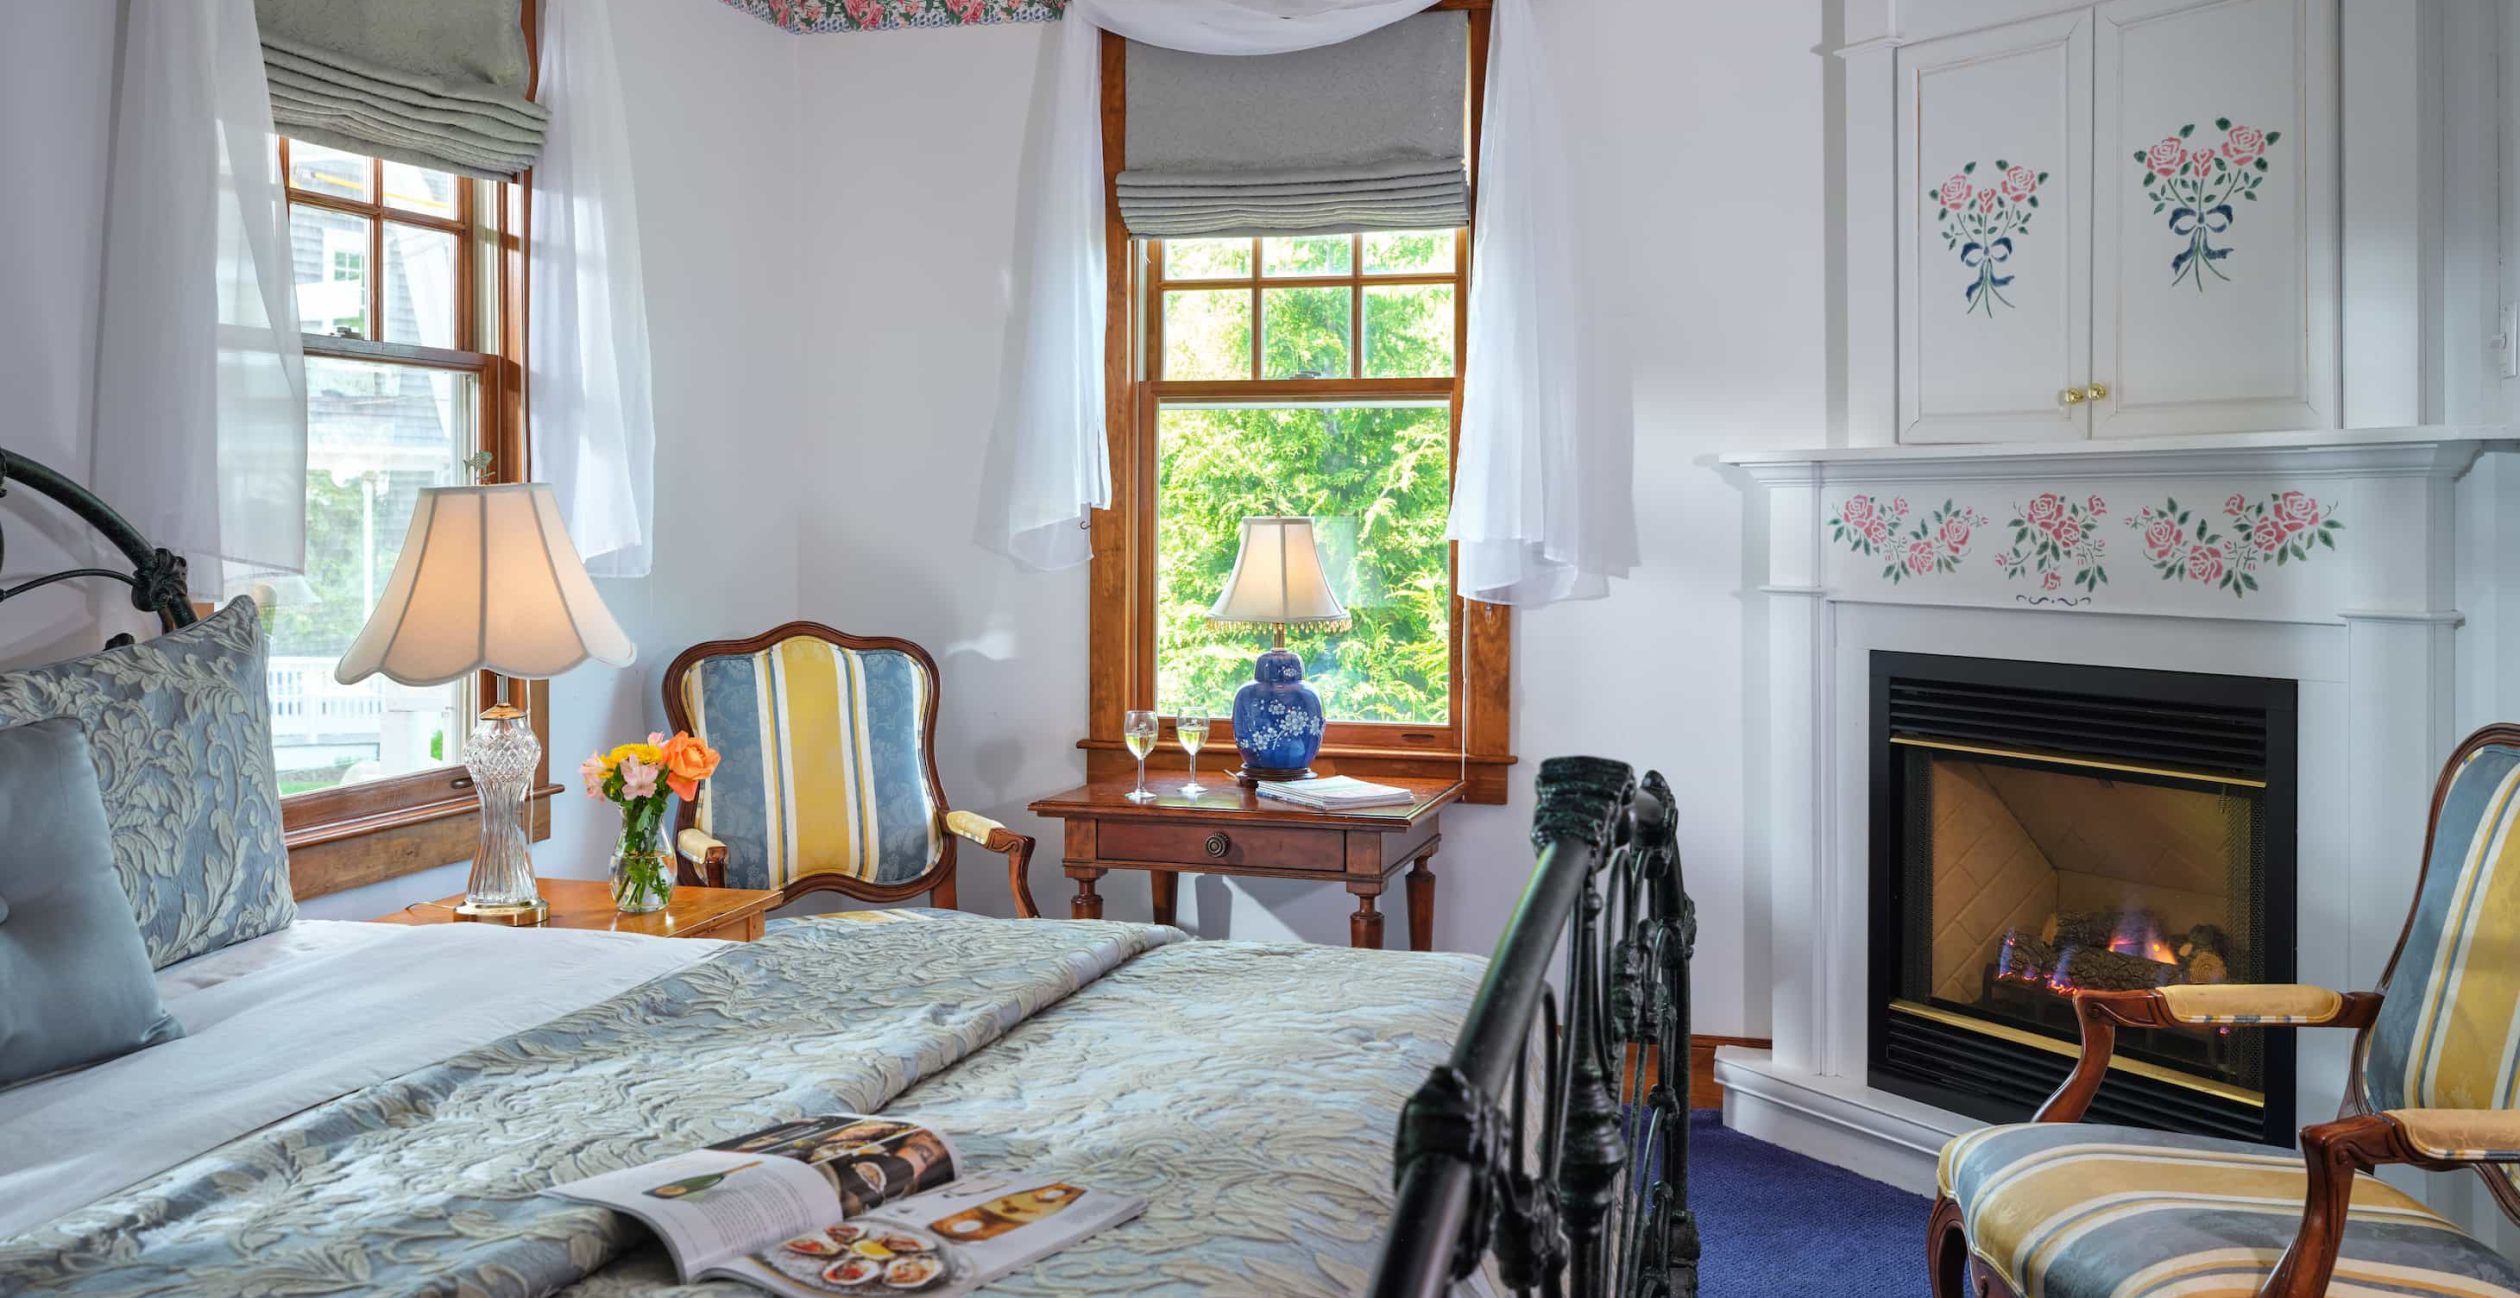 Harriet Beecher Stowe Room at boutique hotel on Cape Cod, MA